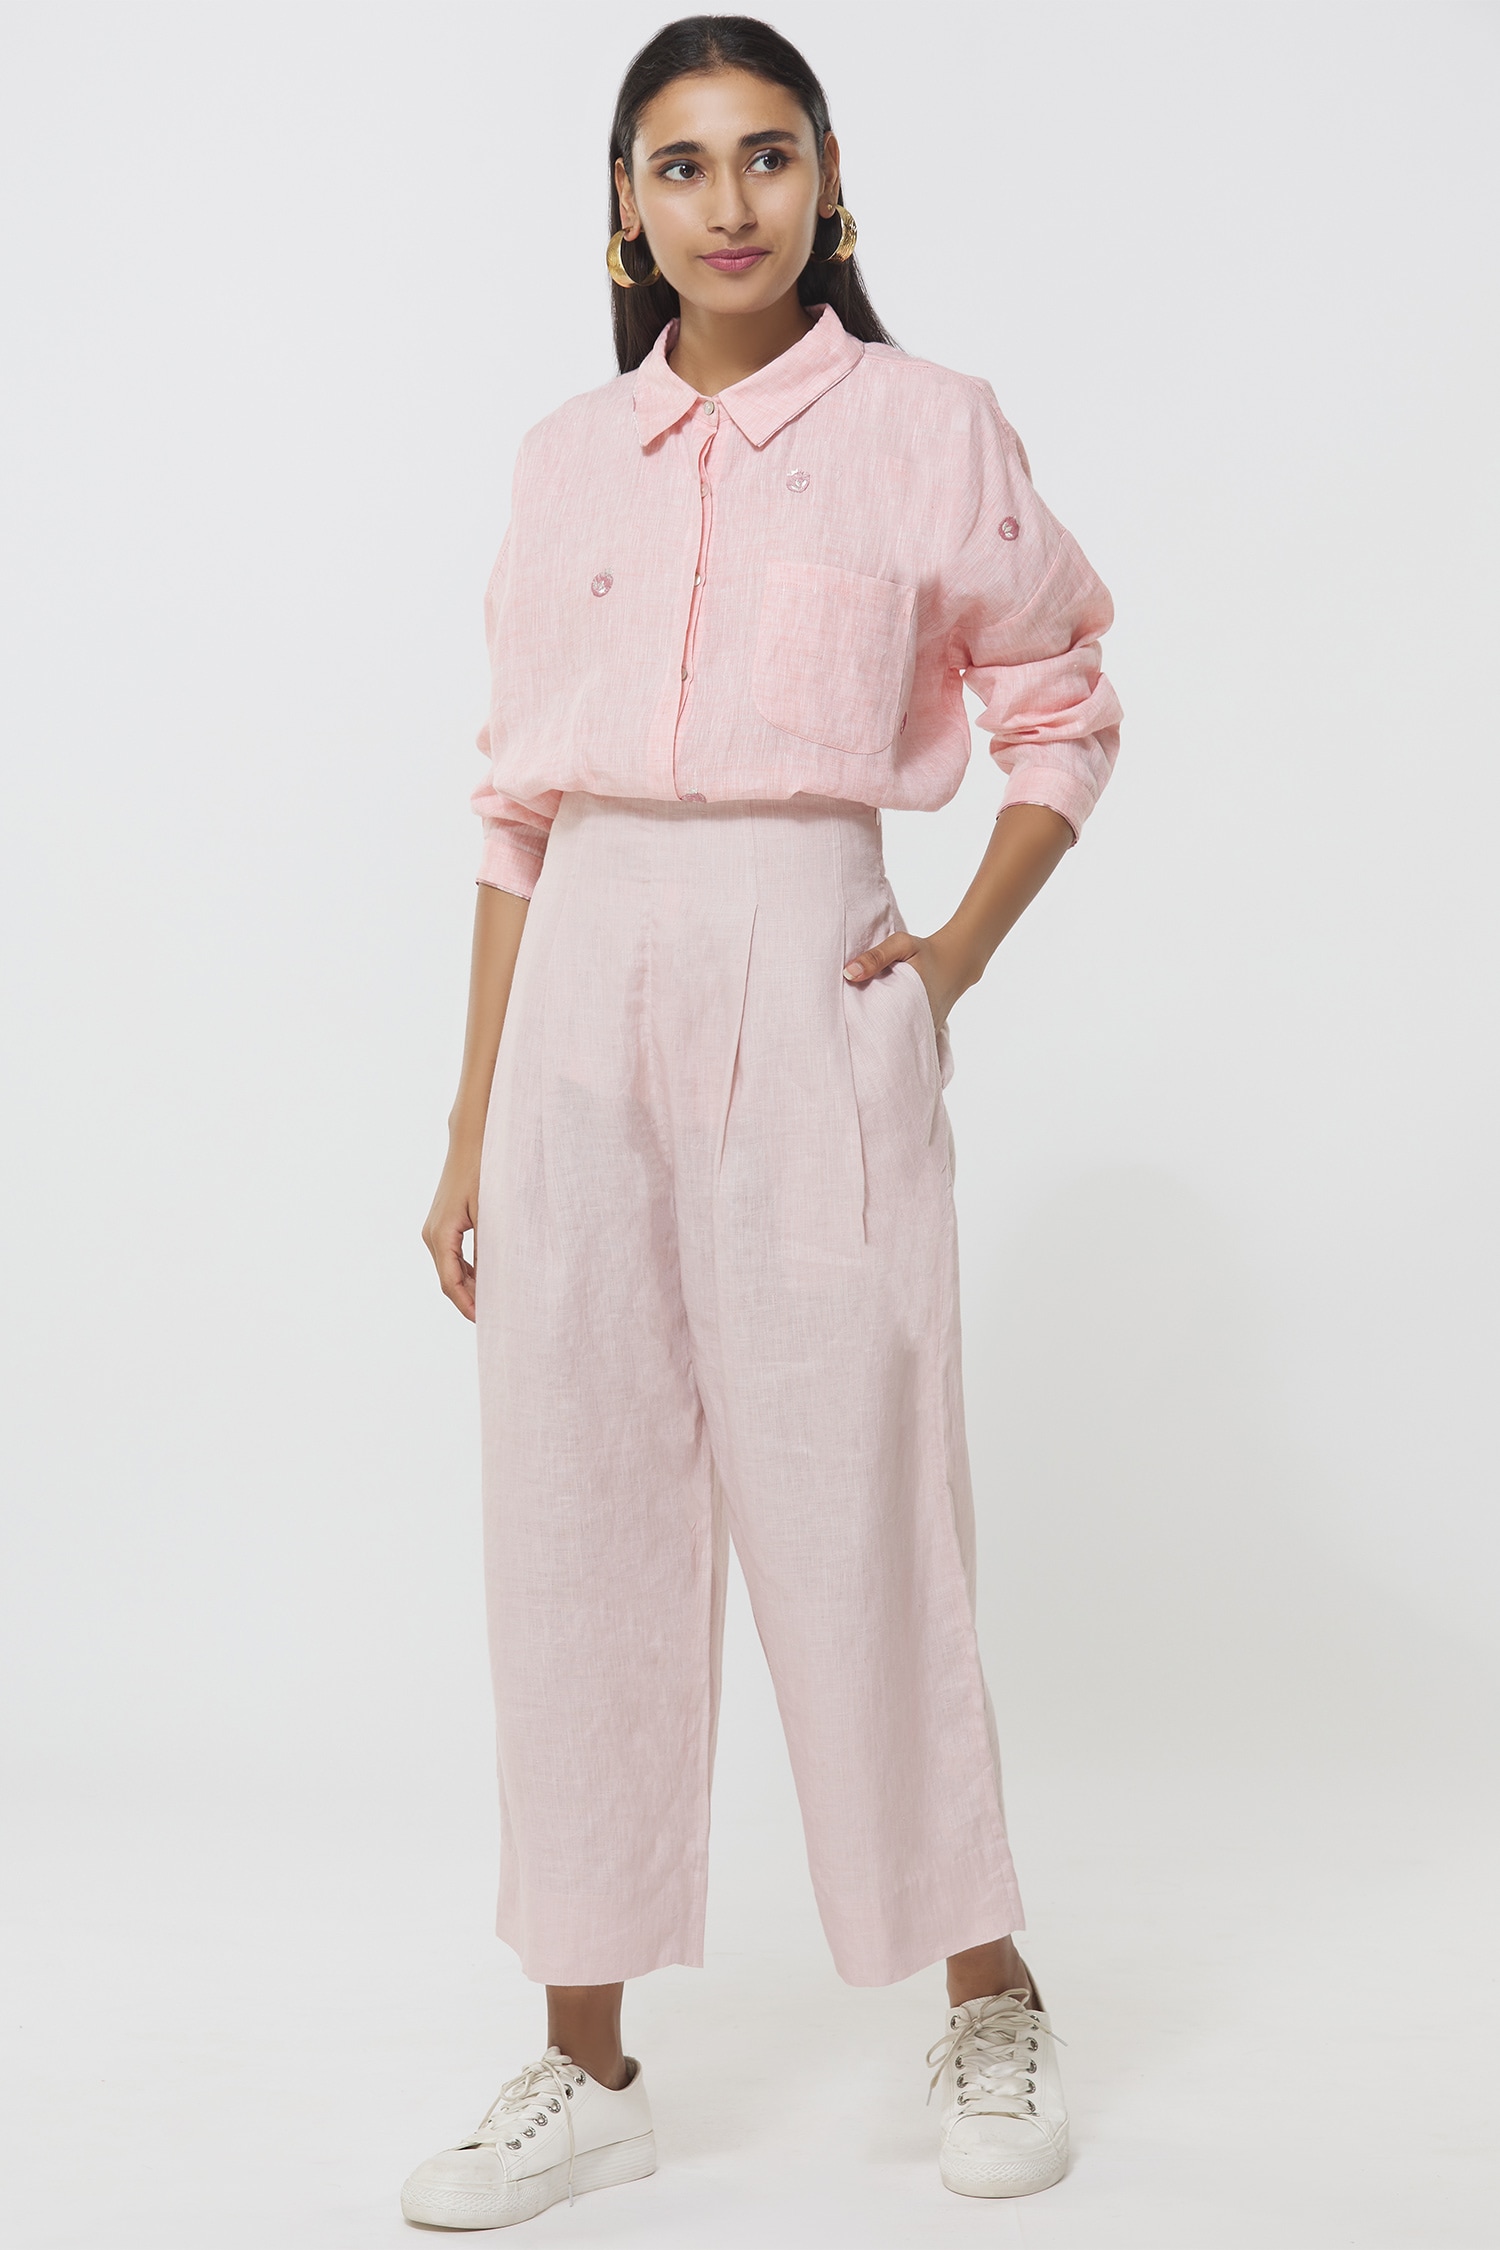 Buy Pink Linen Pants For Women by Anavila Online at Aza Fashions.